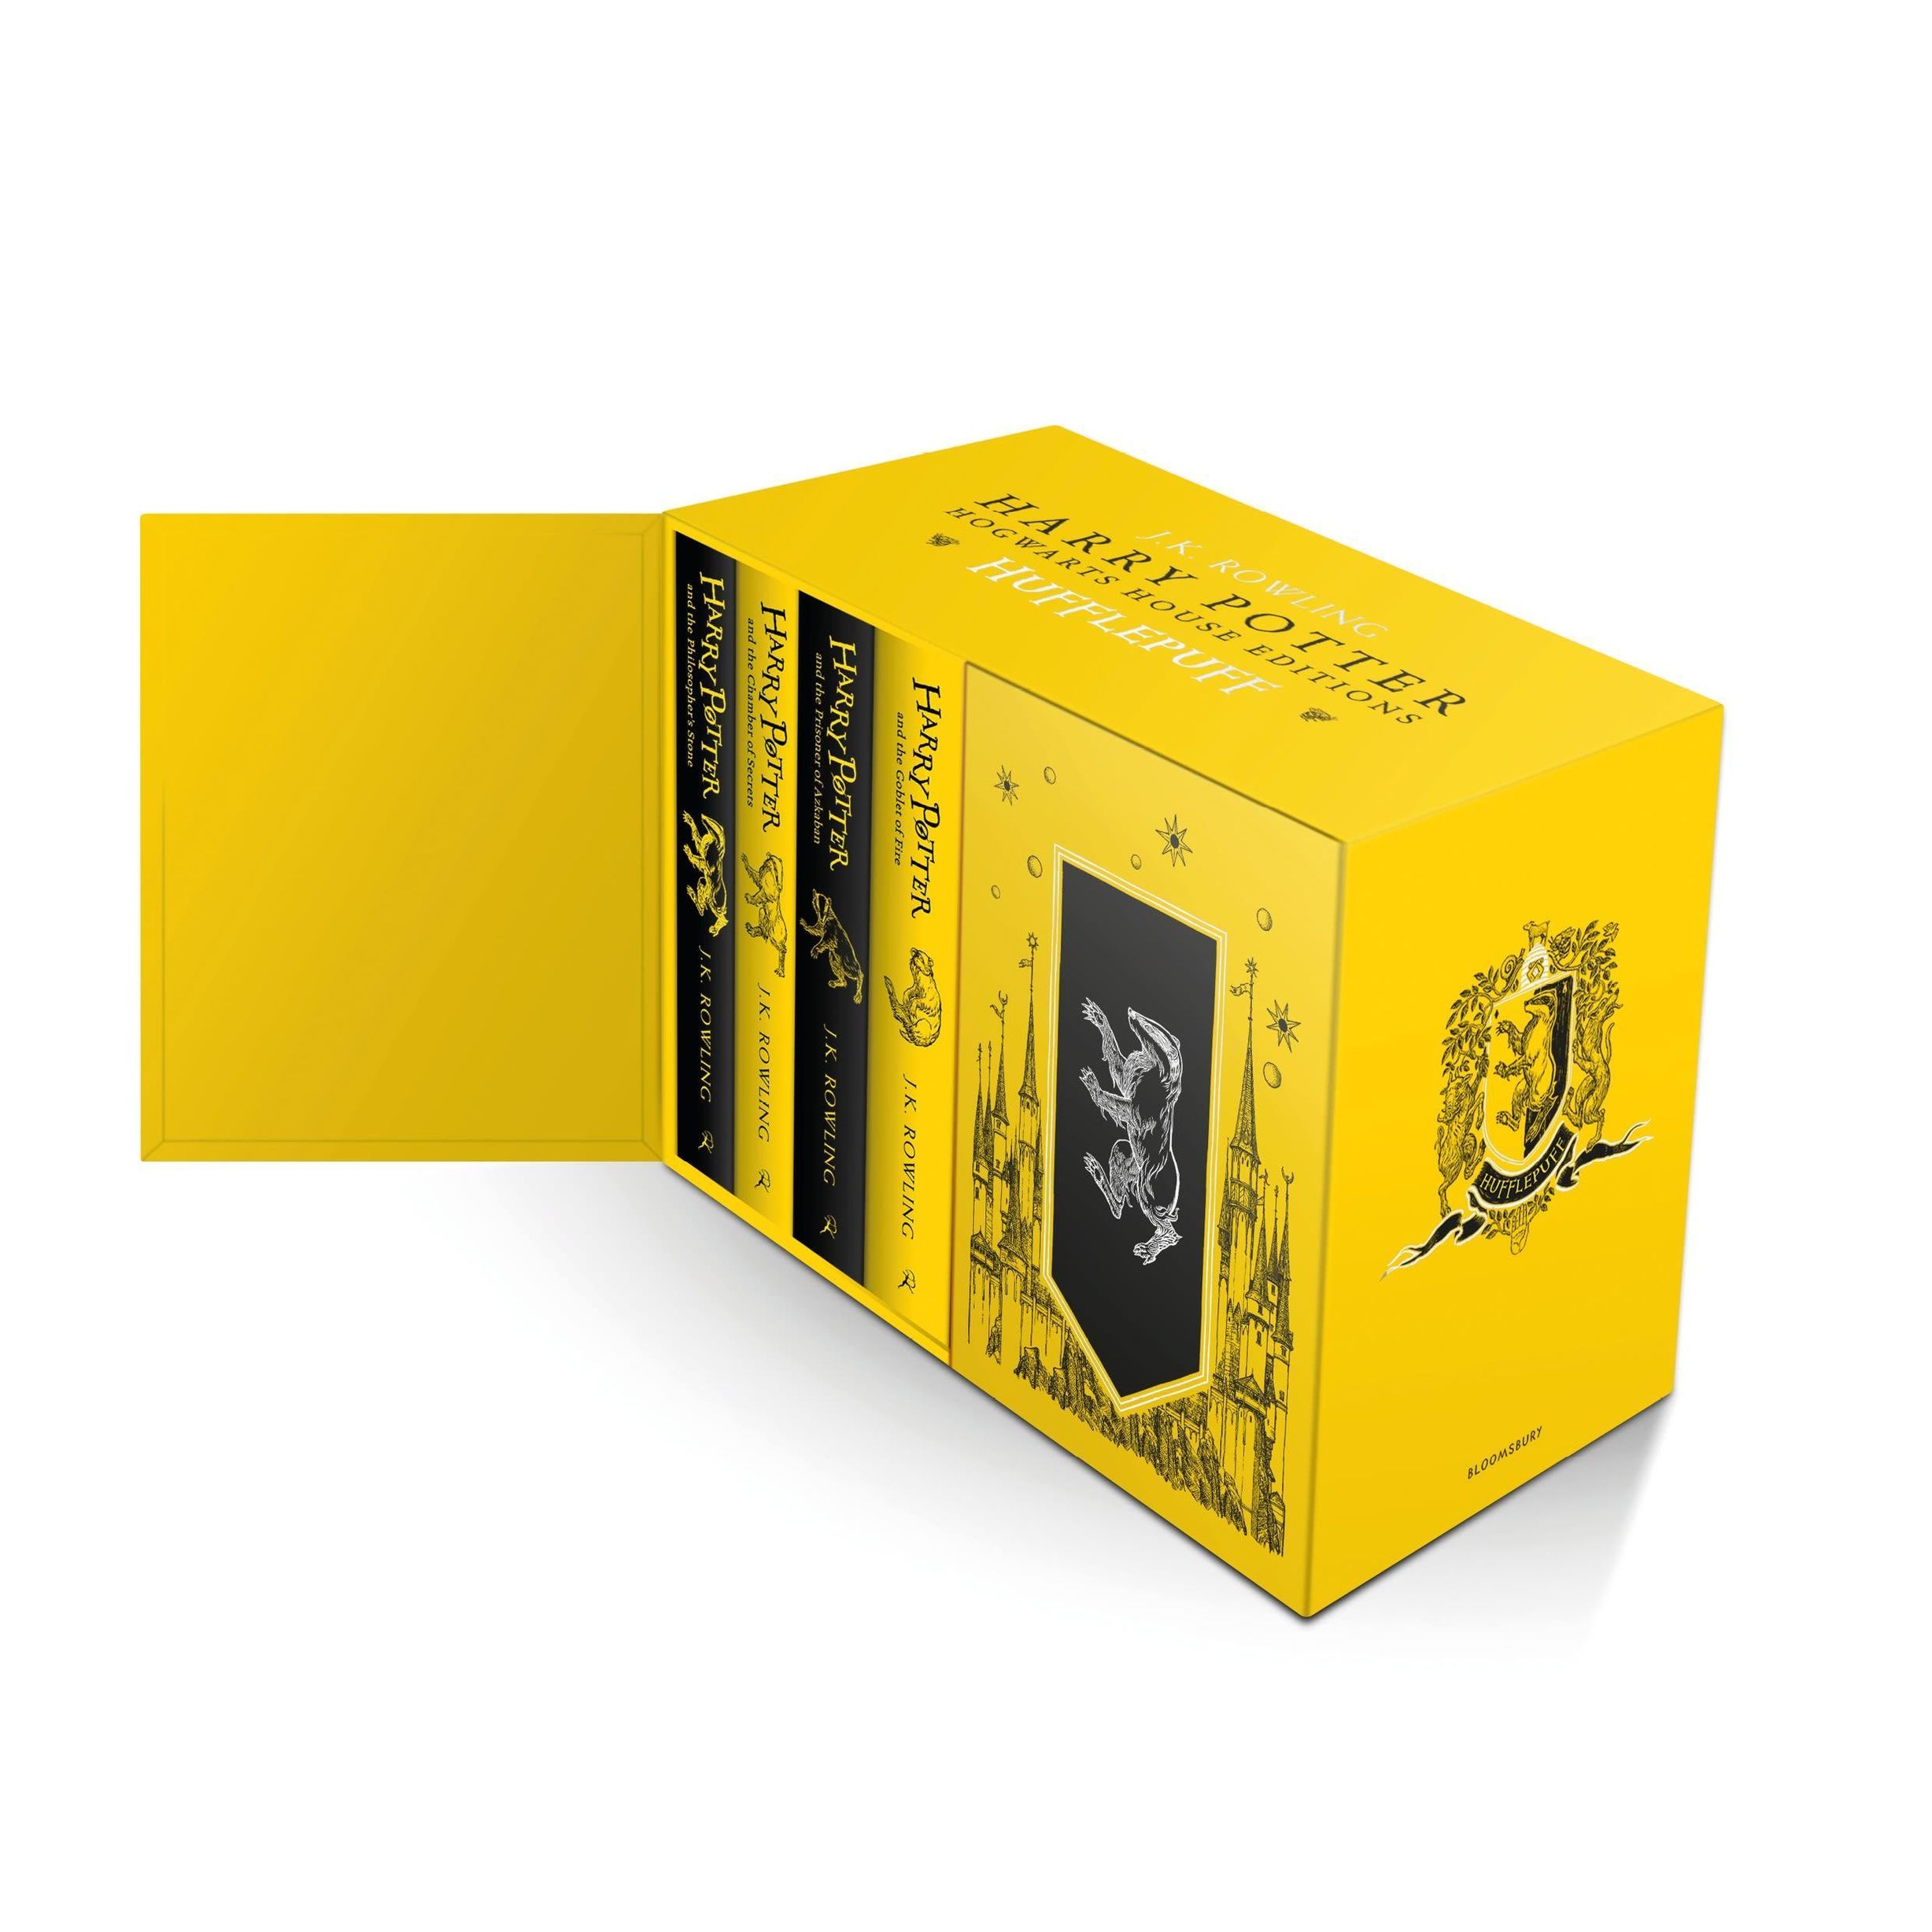 Harry Potter Hufflepuff House Editions Hardback Box Set, m. Buch, m. Buch,  m. Buch, m. Buch, m. Buch, m. Buch, m. Buch